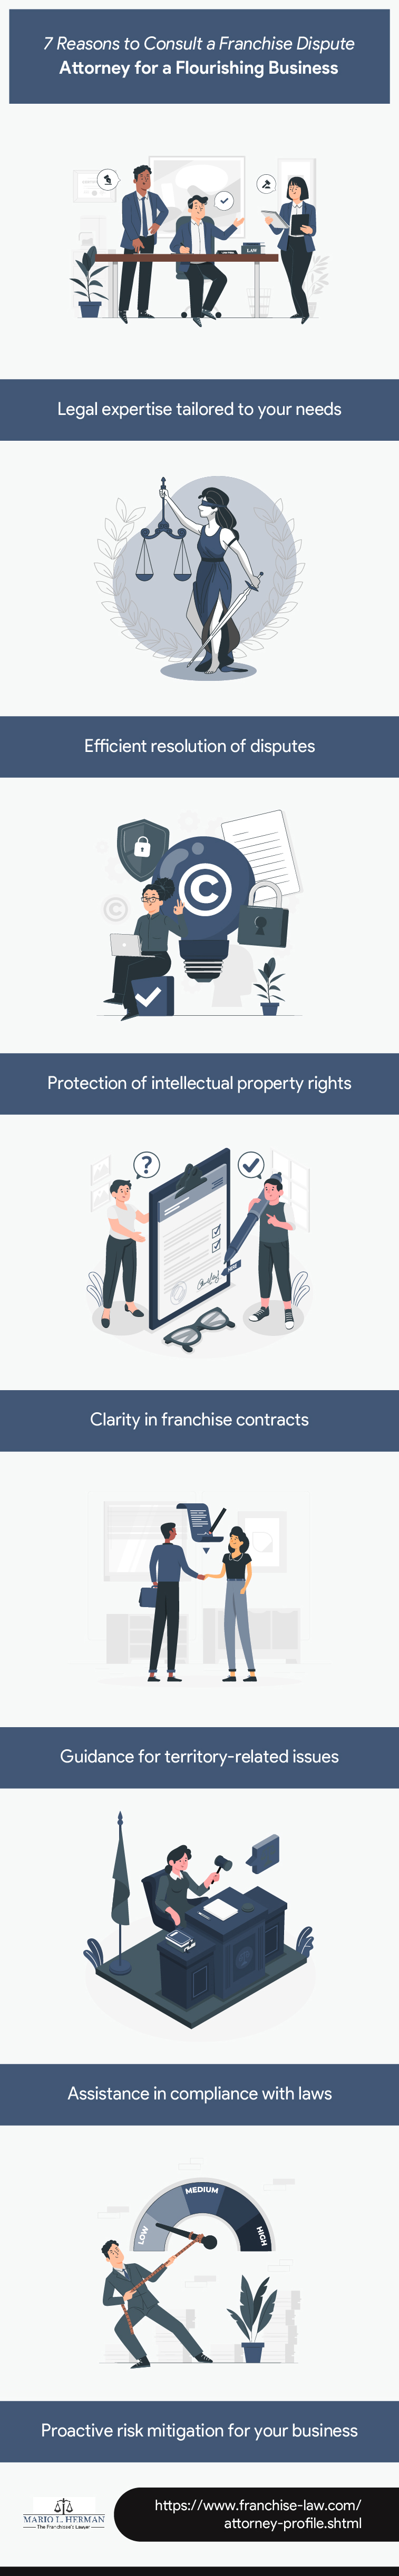 Reasons to Consult a Franchise Dispute Attorney